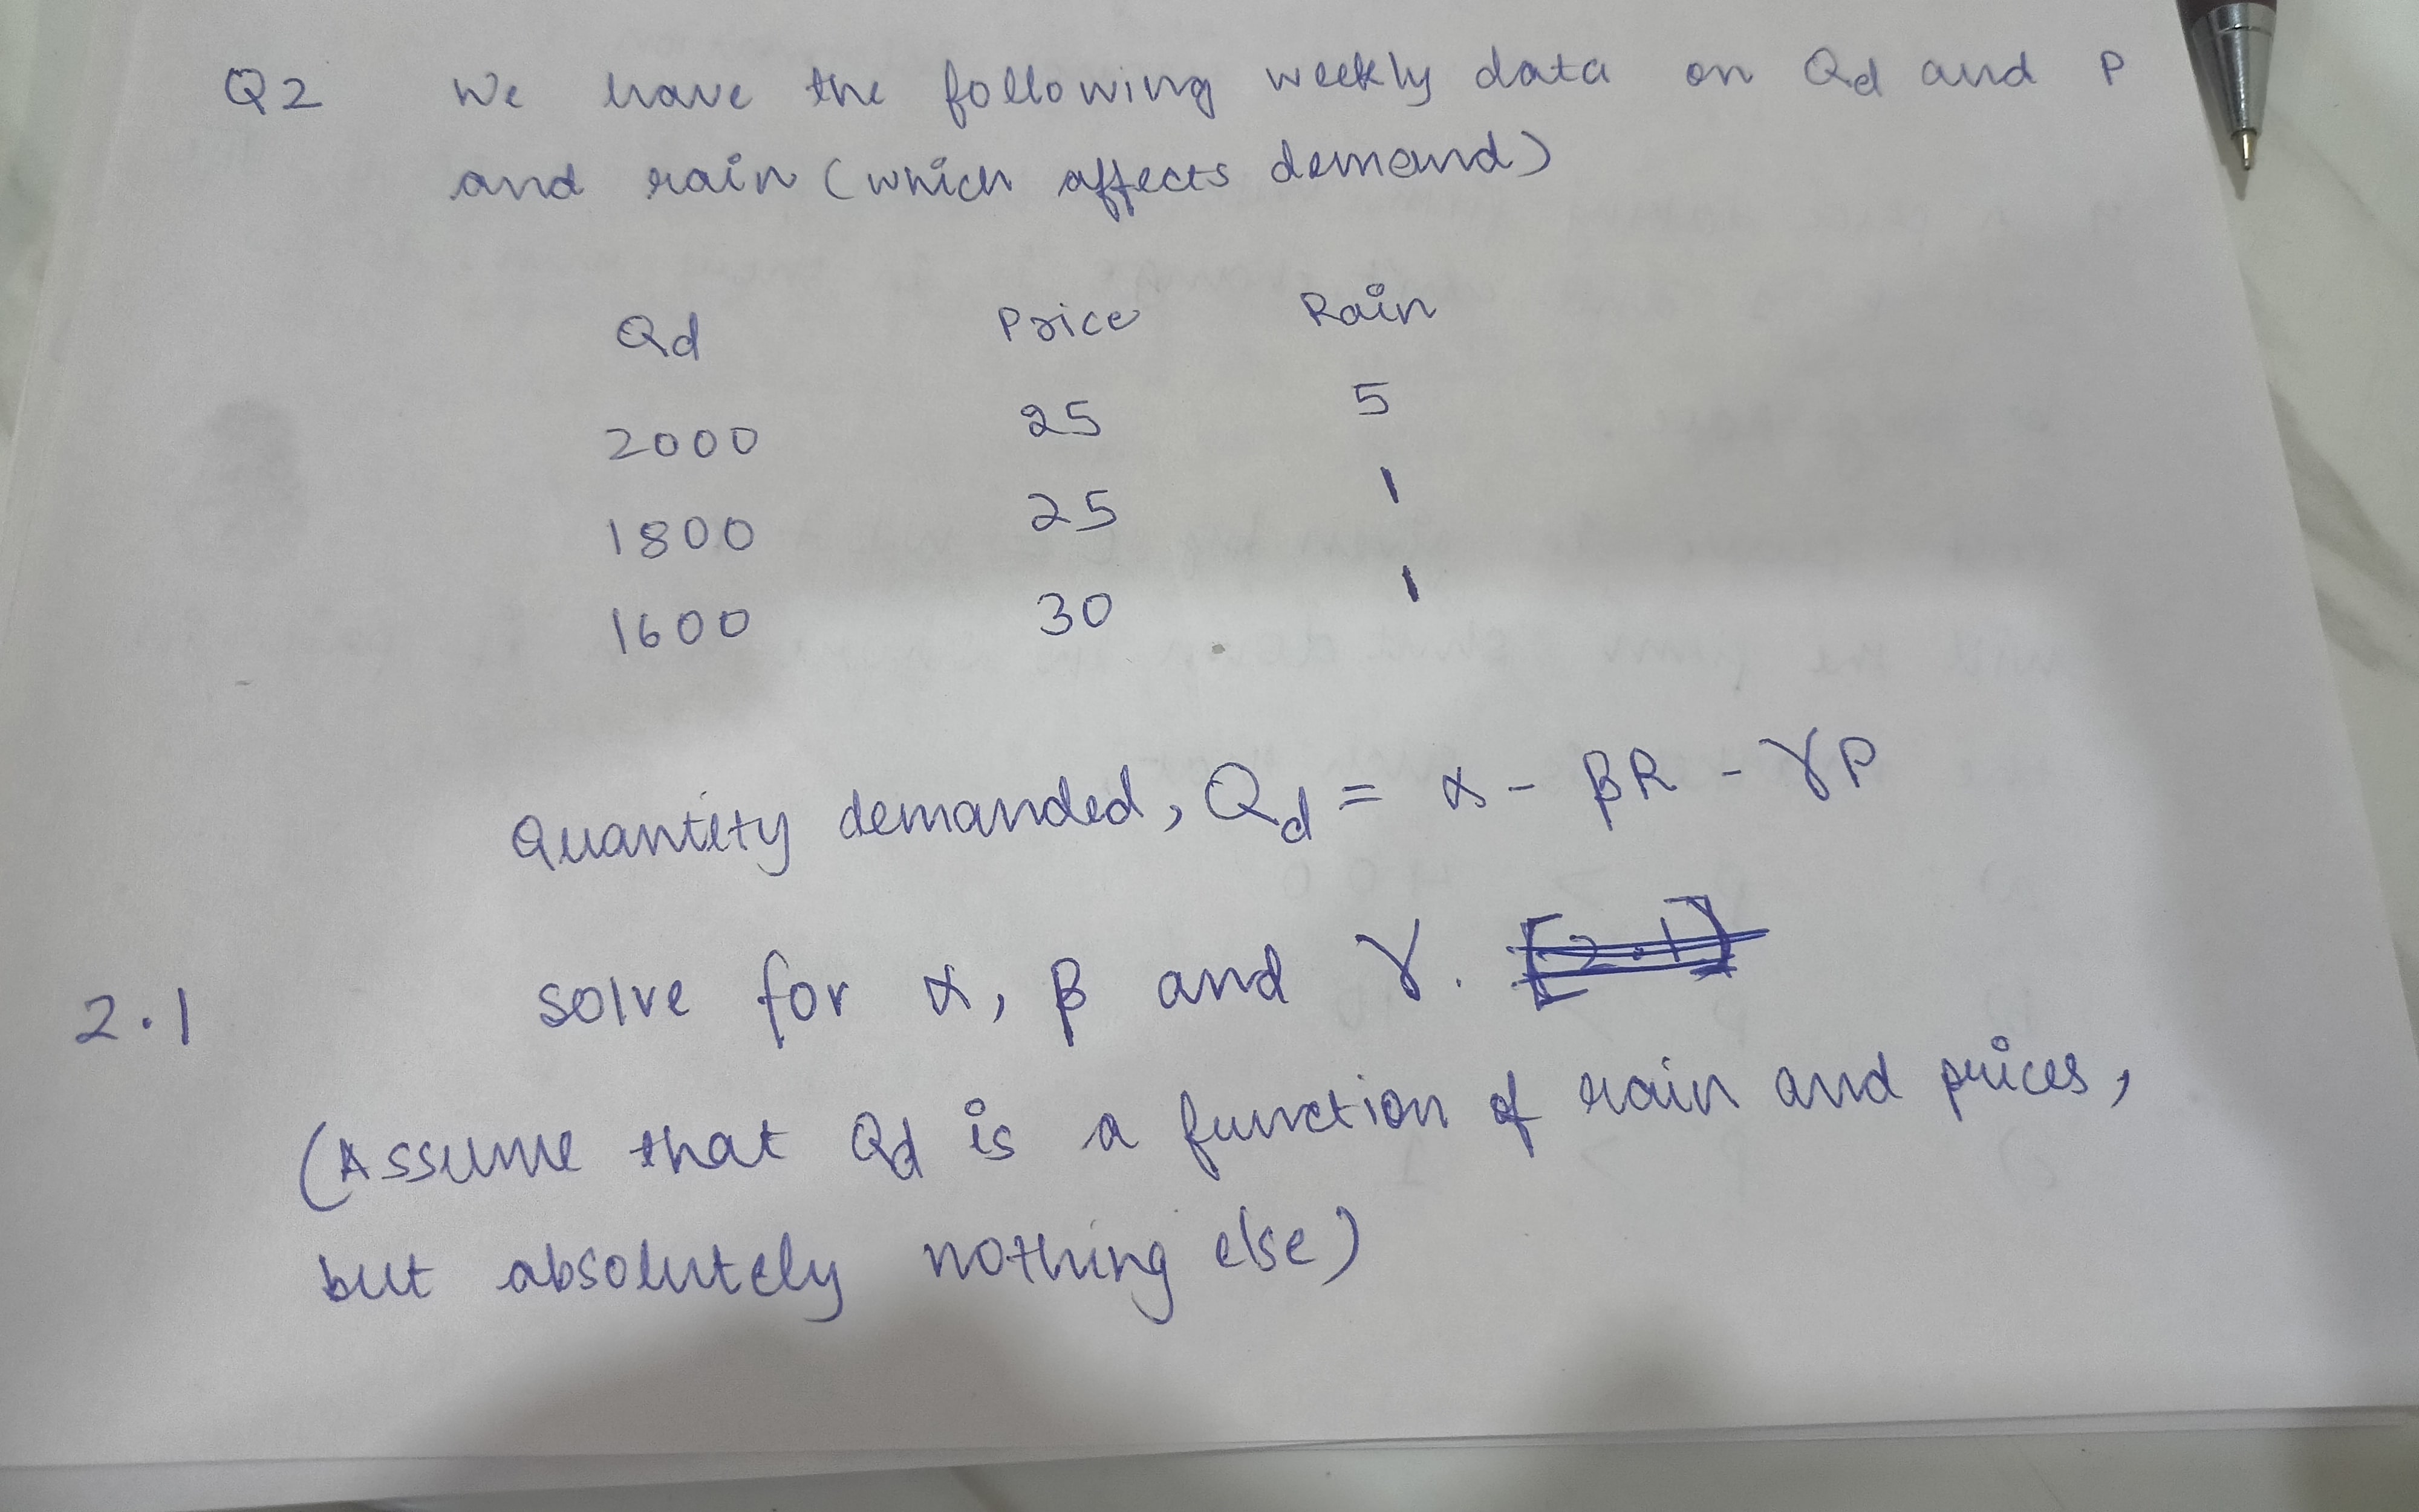 Q2 We have the following weekly data on ( Q_{d} ) and ( P ) and rain (which affects demend)
Quantity demanded, ( Q_{d}=